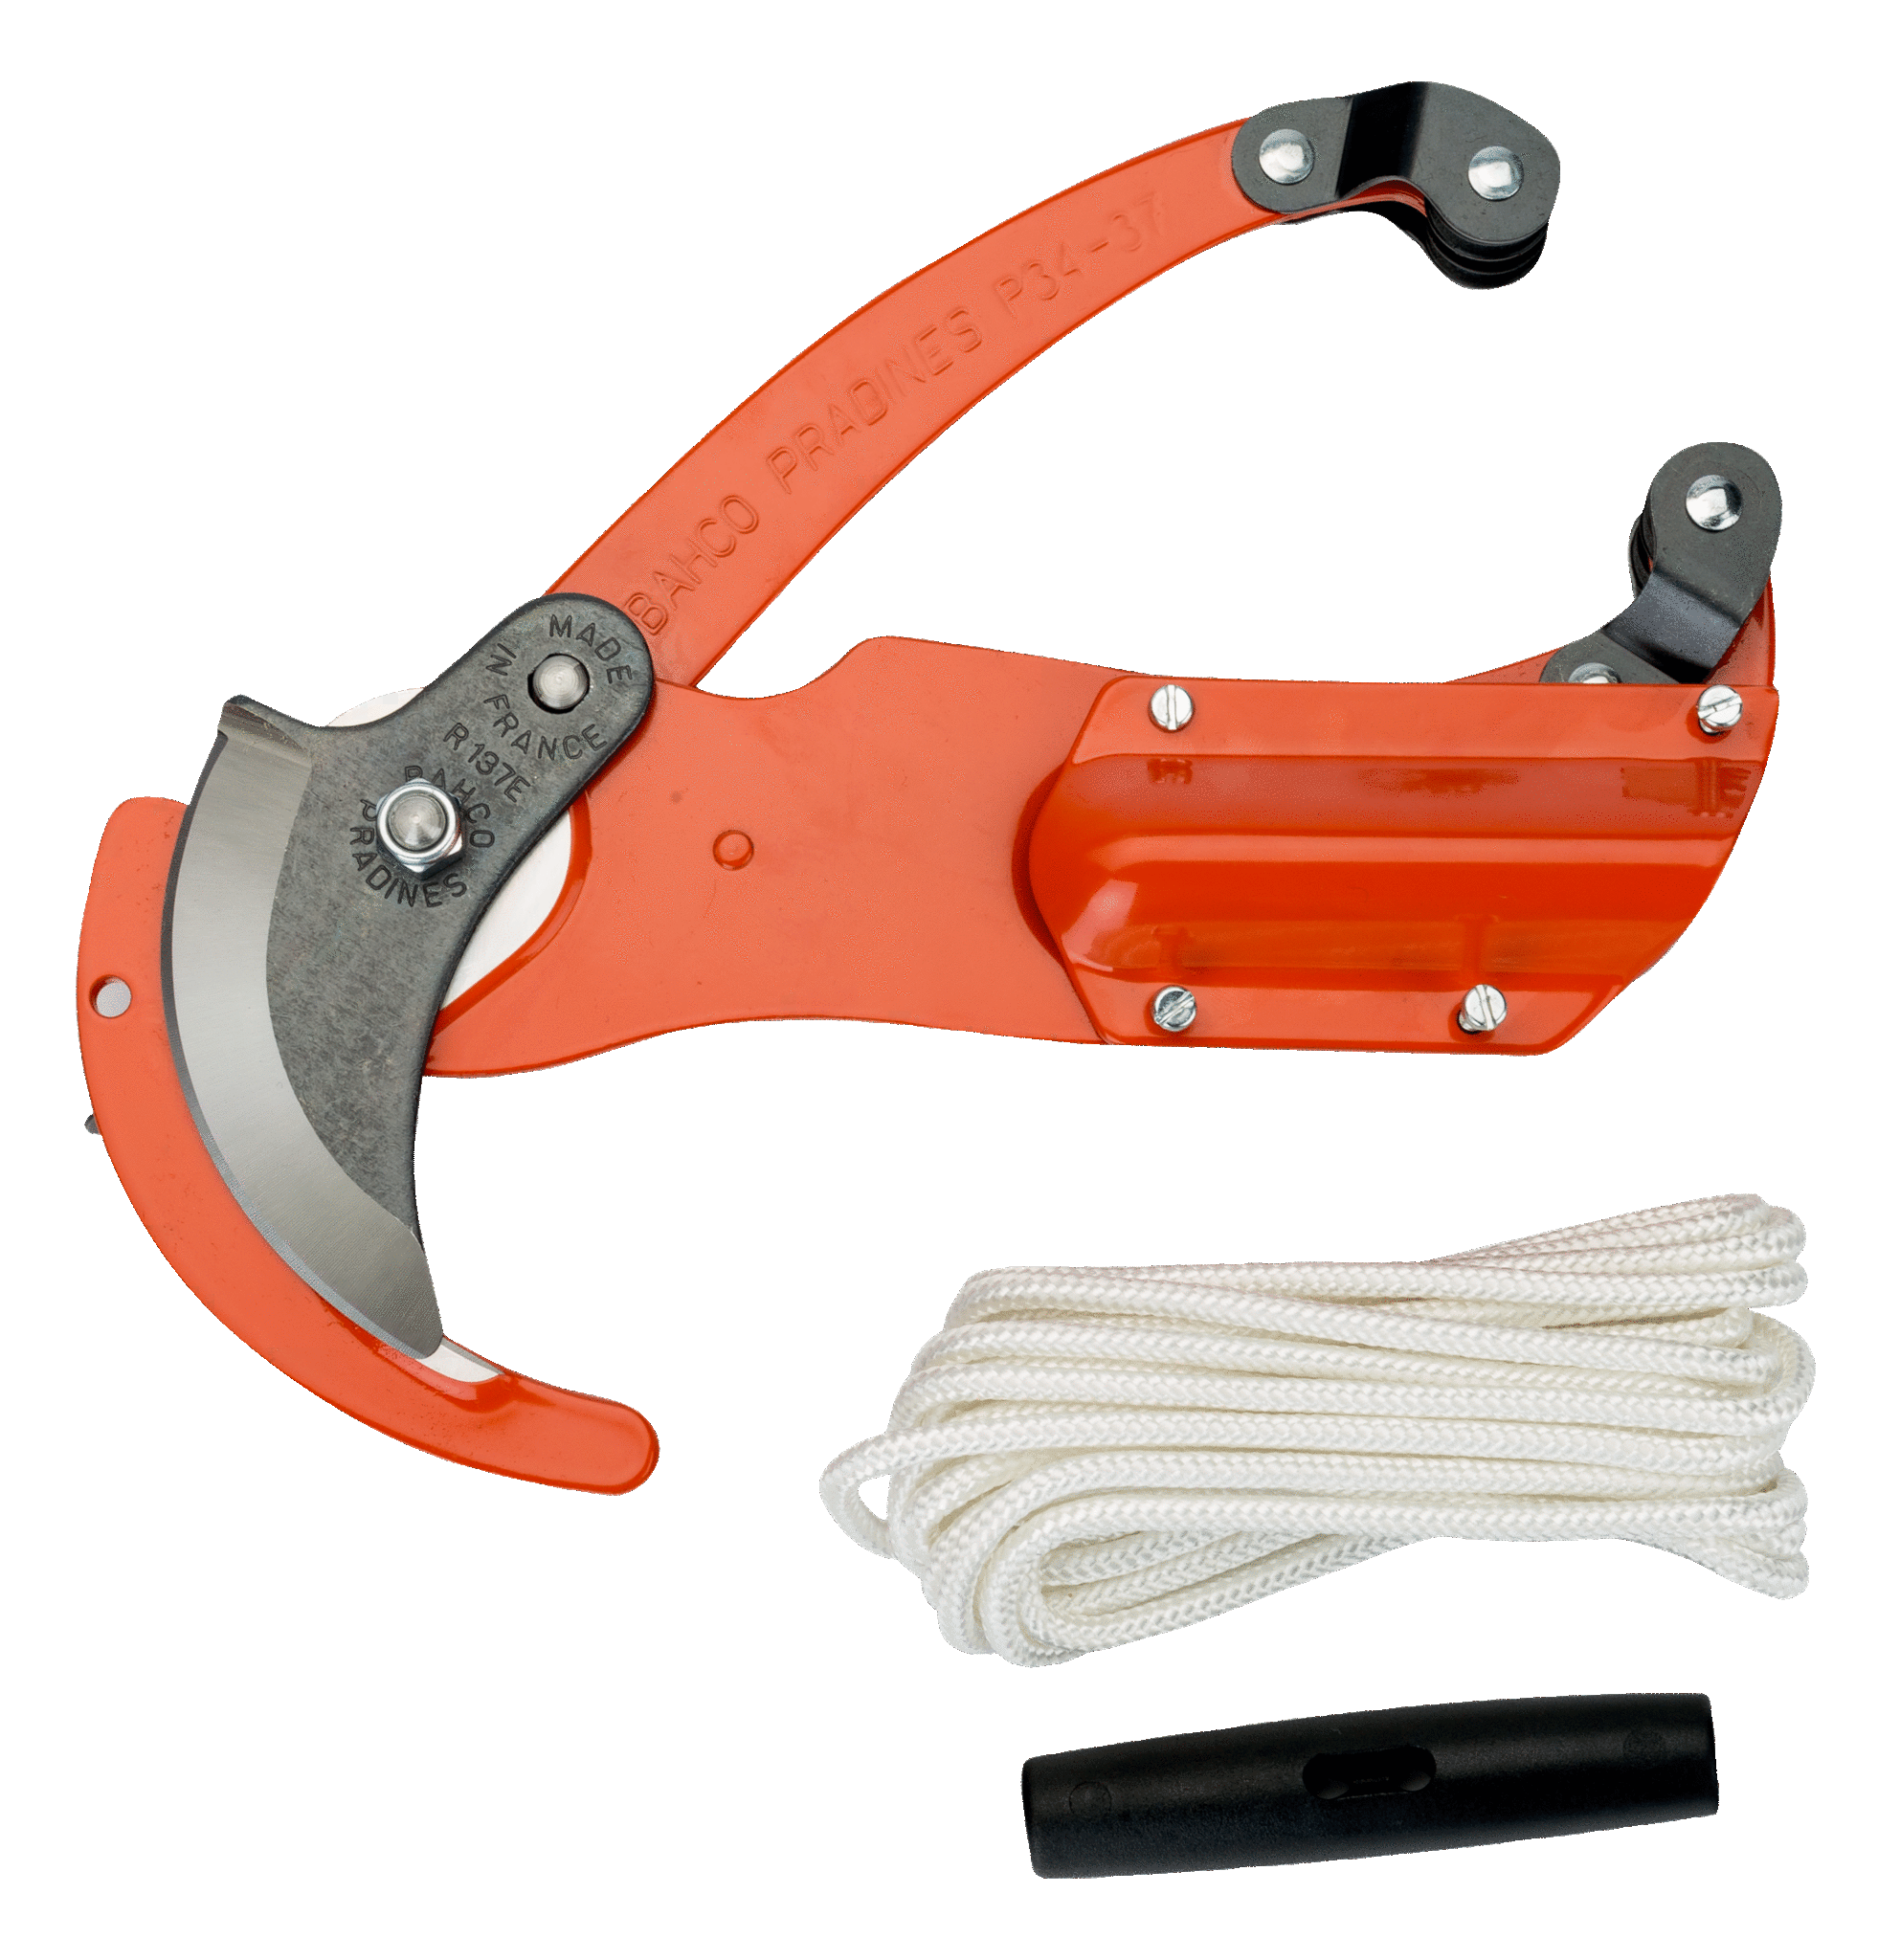 Top Pruners with Triple Pulley Action